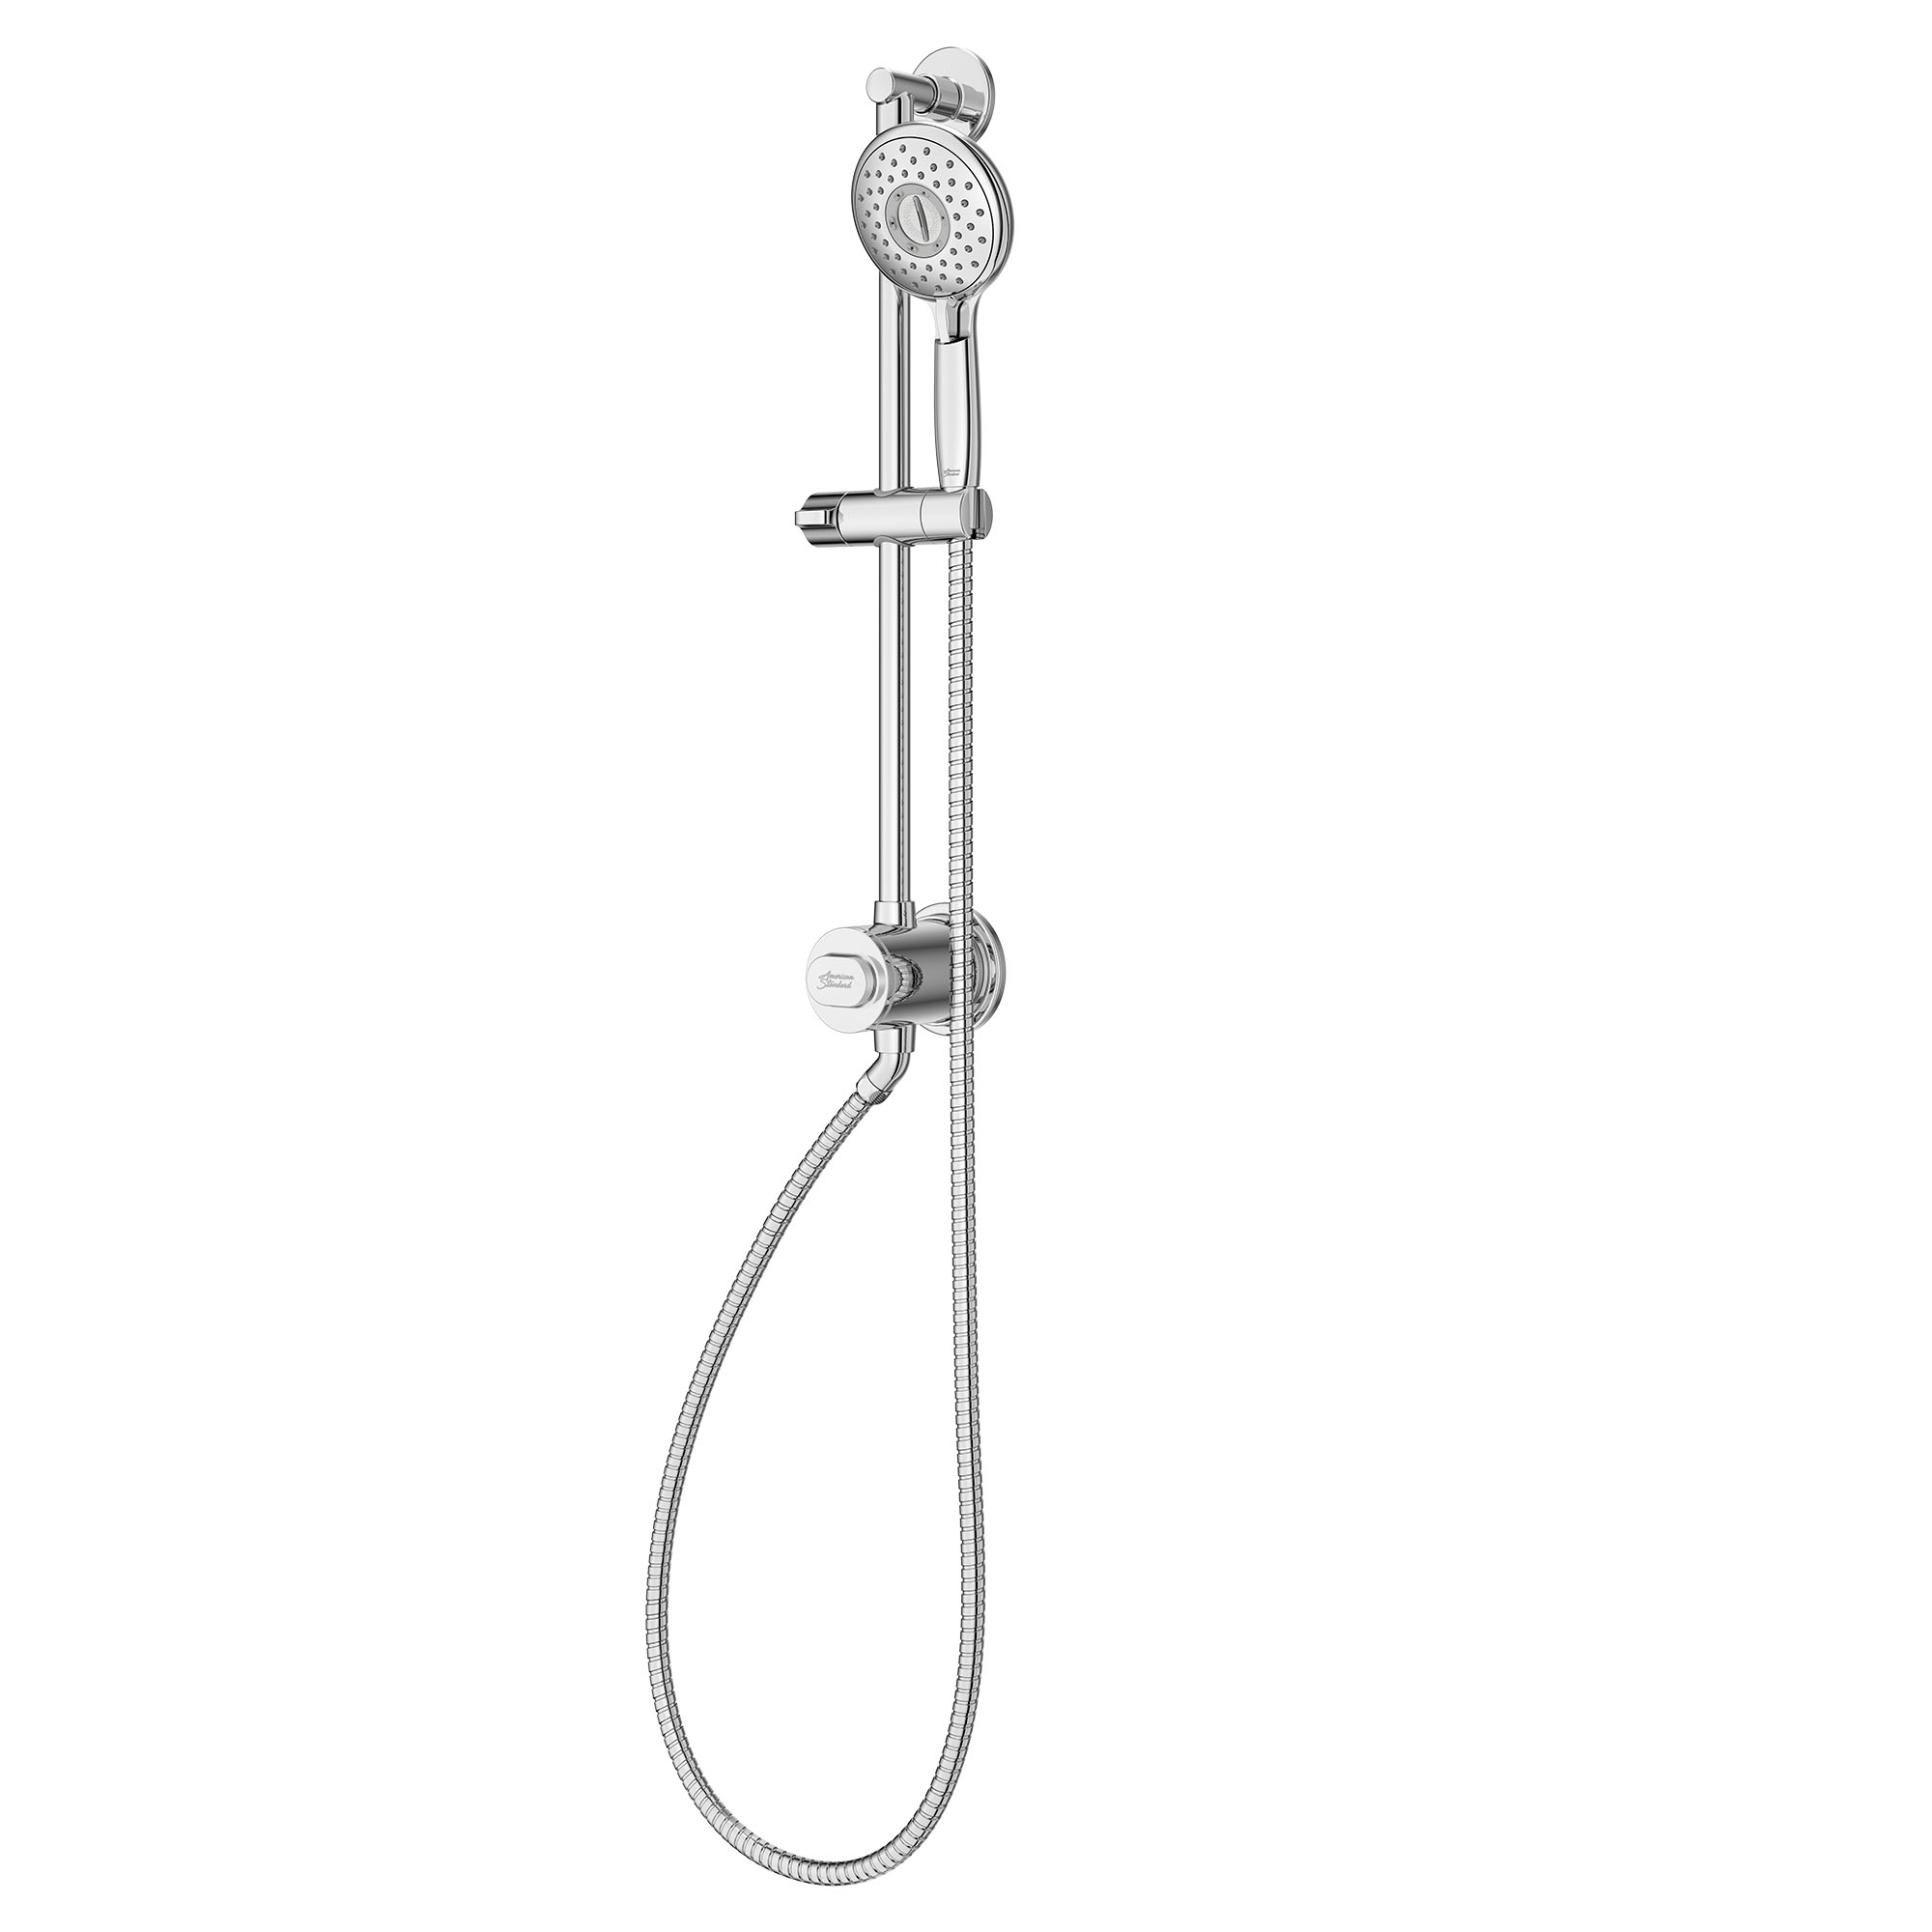 Spectra® 24-Inch 4-Spray 1.8 gpm/6.8 L/min Hand Shower Rail System with Filter